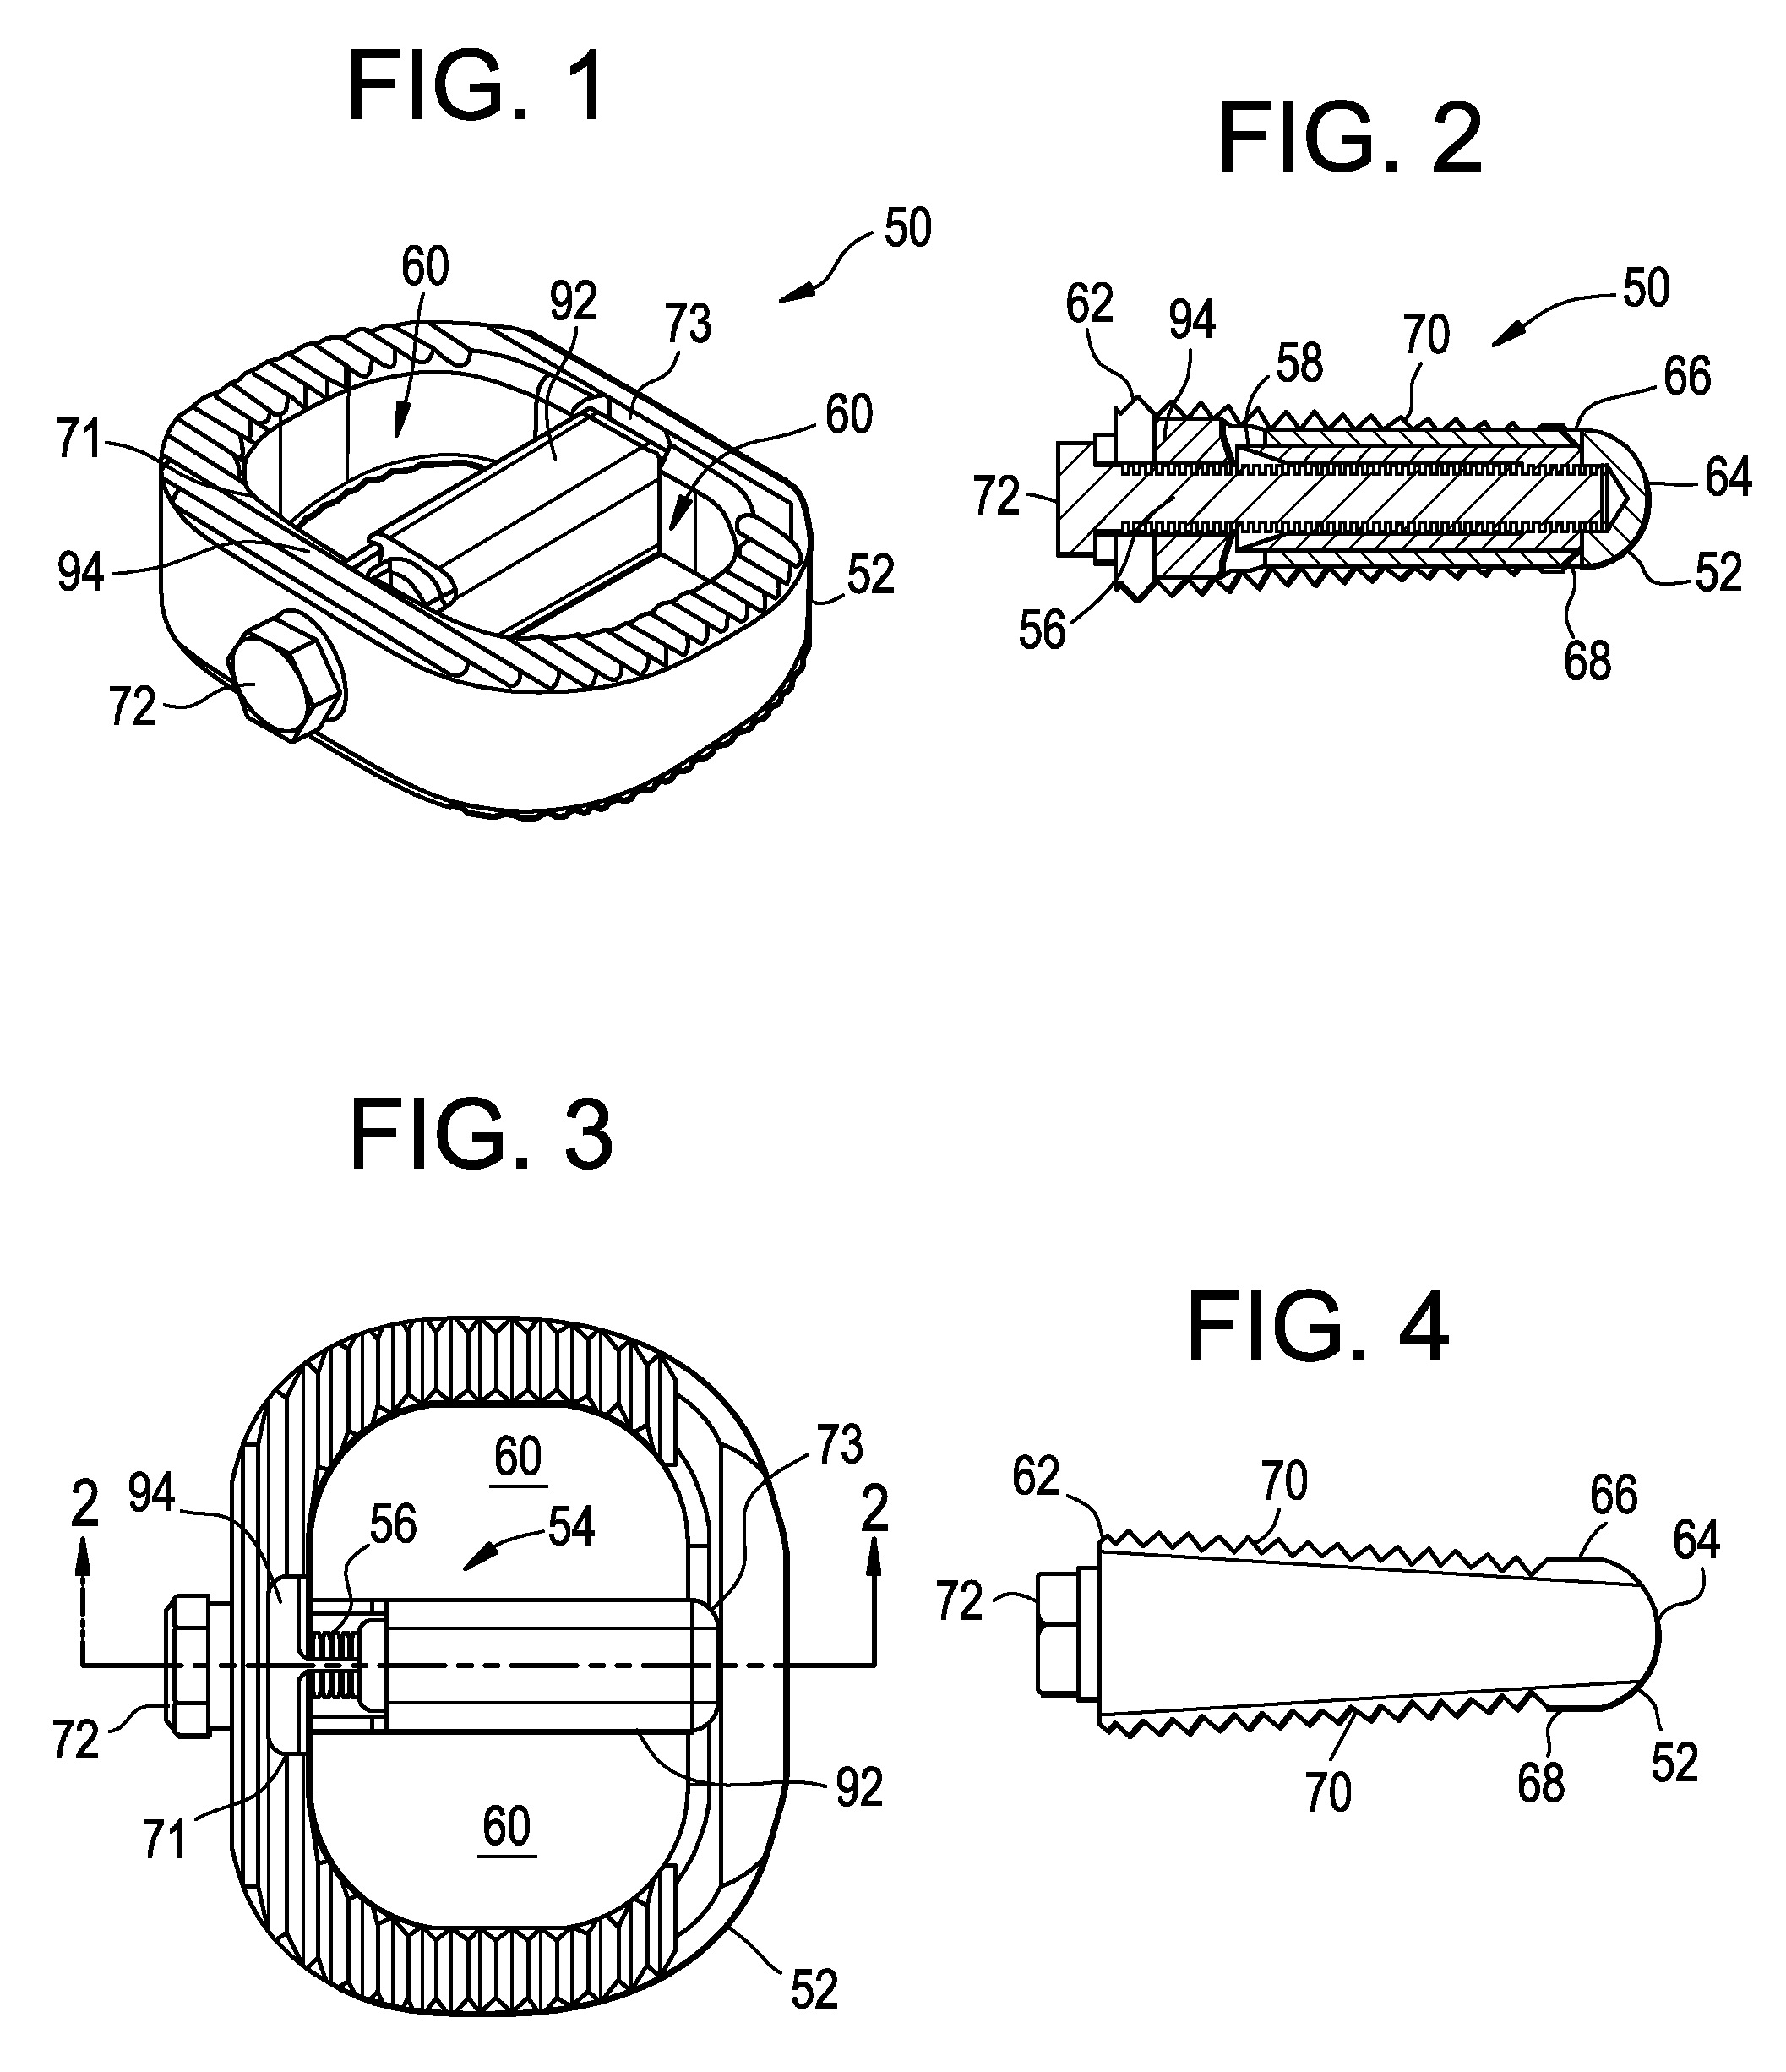 Interbody fusion device and method of operation